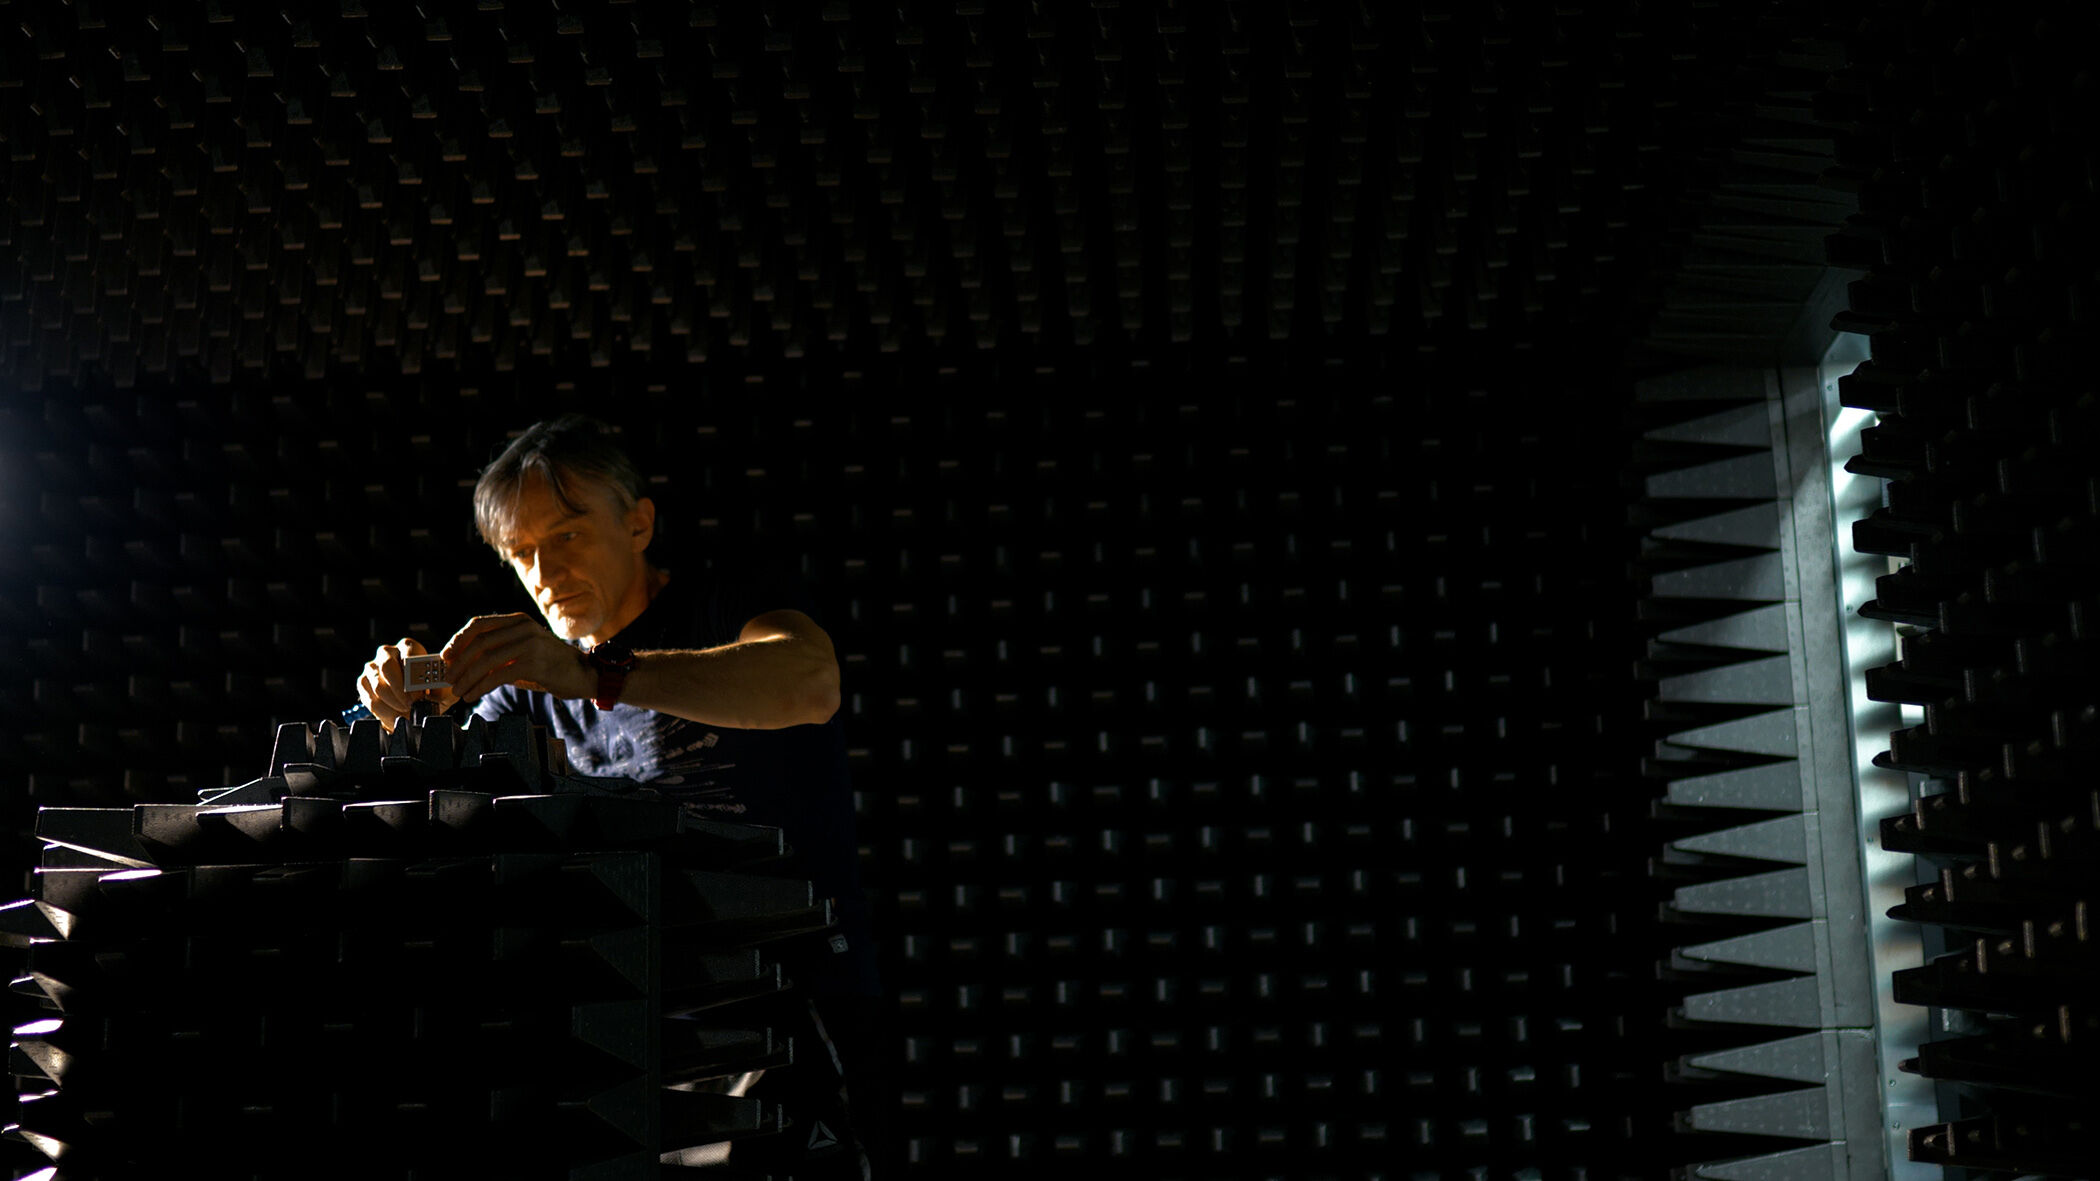 Dr. Slawomir Koziel works manly in the anaechoic chamber in the basement of the RU main building.